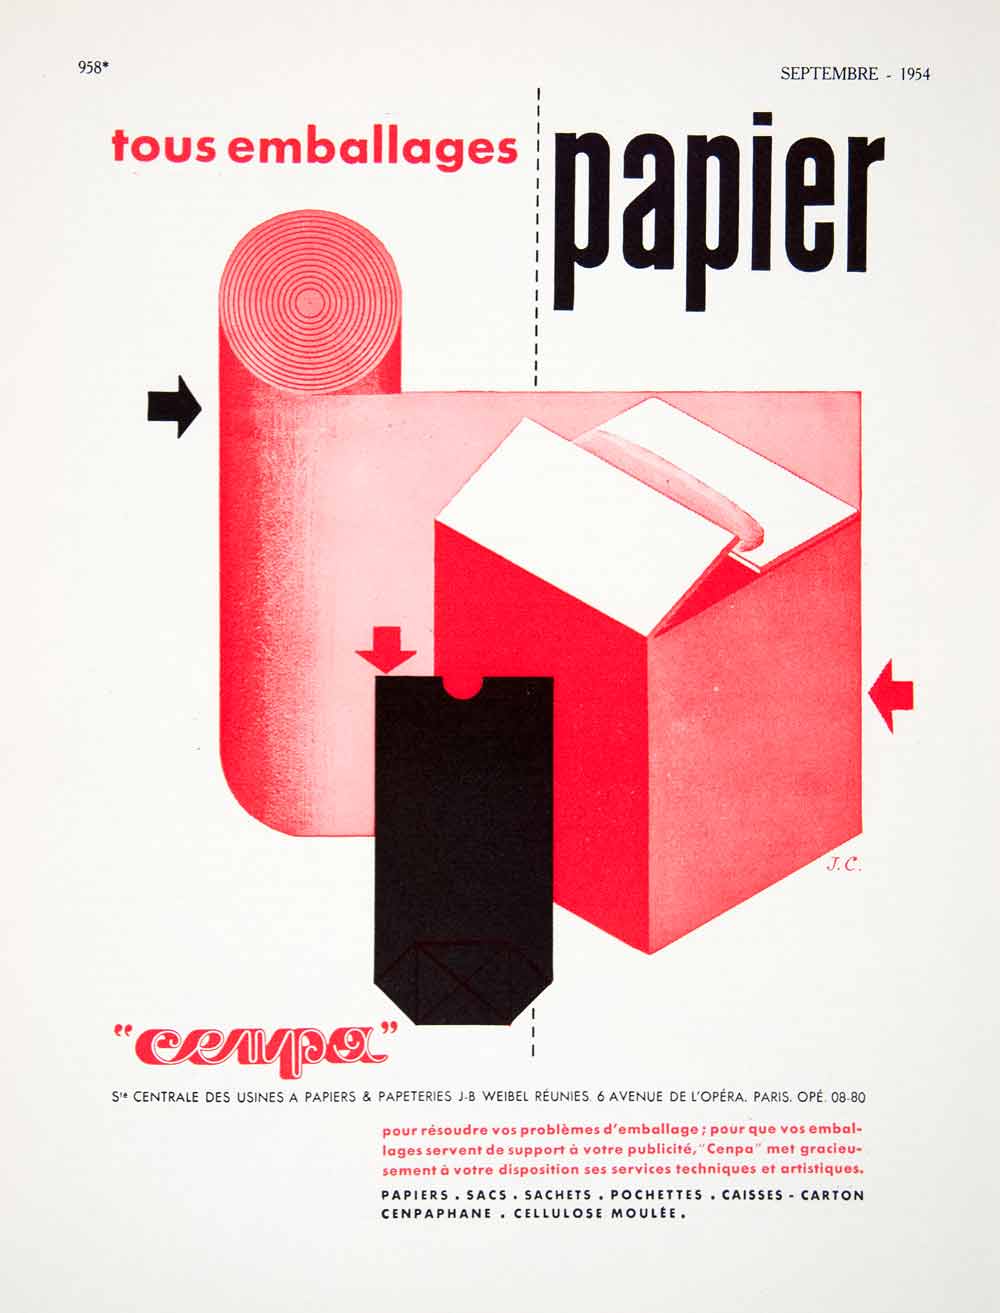 1954 Ad French Packaging Office Supplies Shipping 6 Avenue L'Opera Paris VEN8